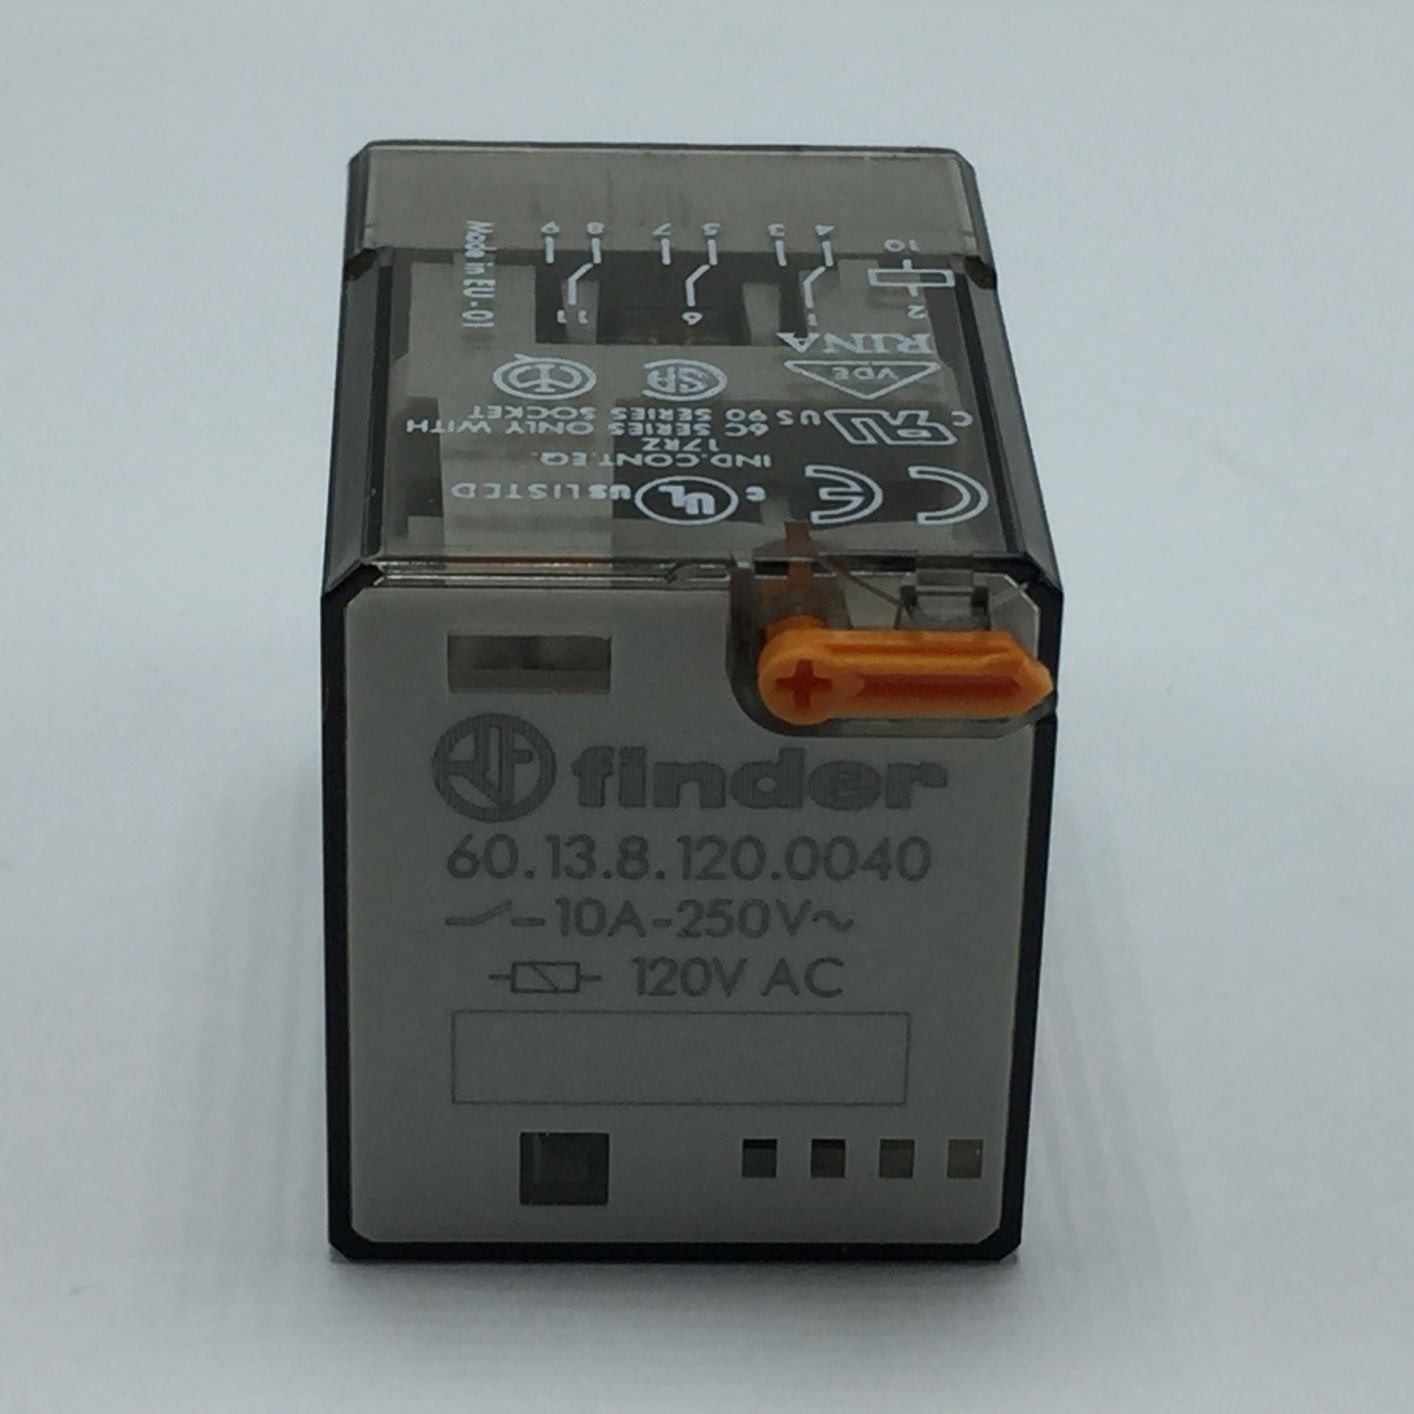 NEW Finder 60.13.8.120.0040 Relay 10Amp 120VAC Coil 